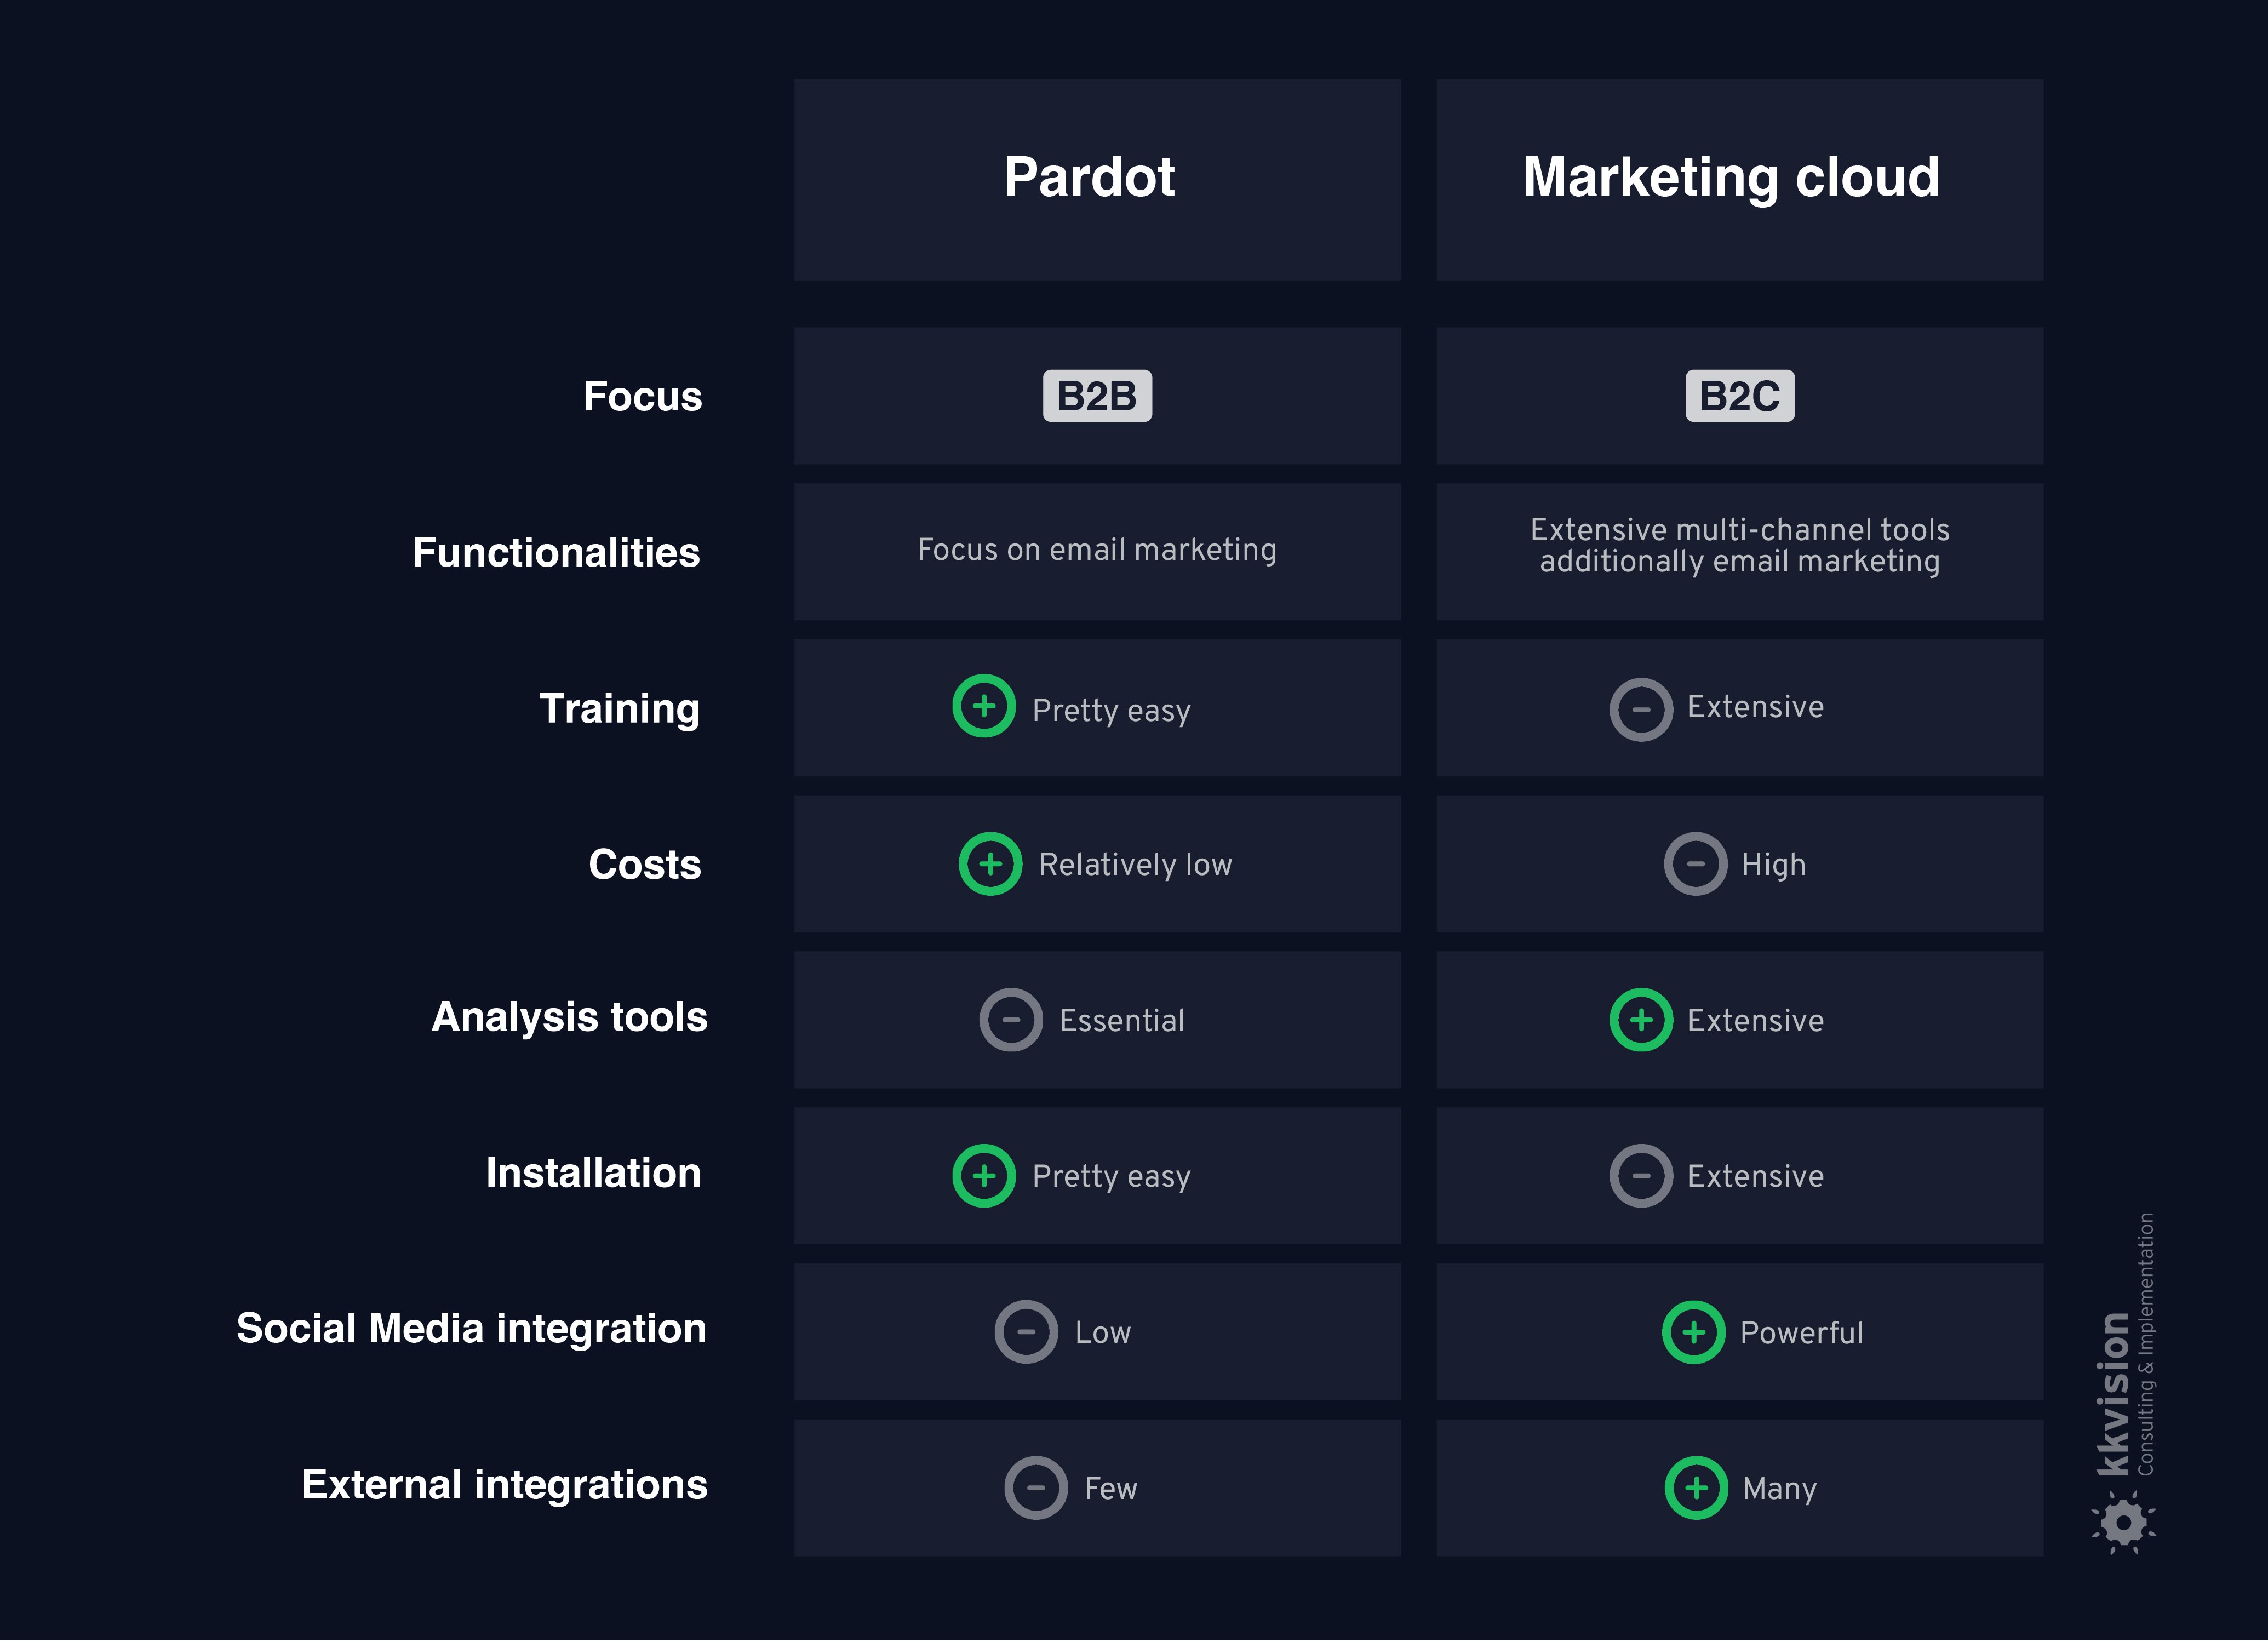 Pardot or the Marketing Cloud? Both marketing automation tools offer specific strengths in combination with Salesforce